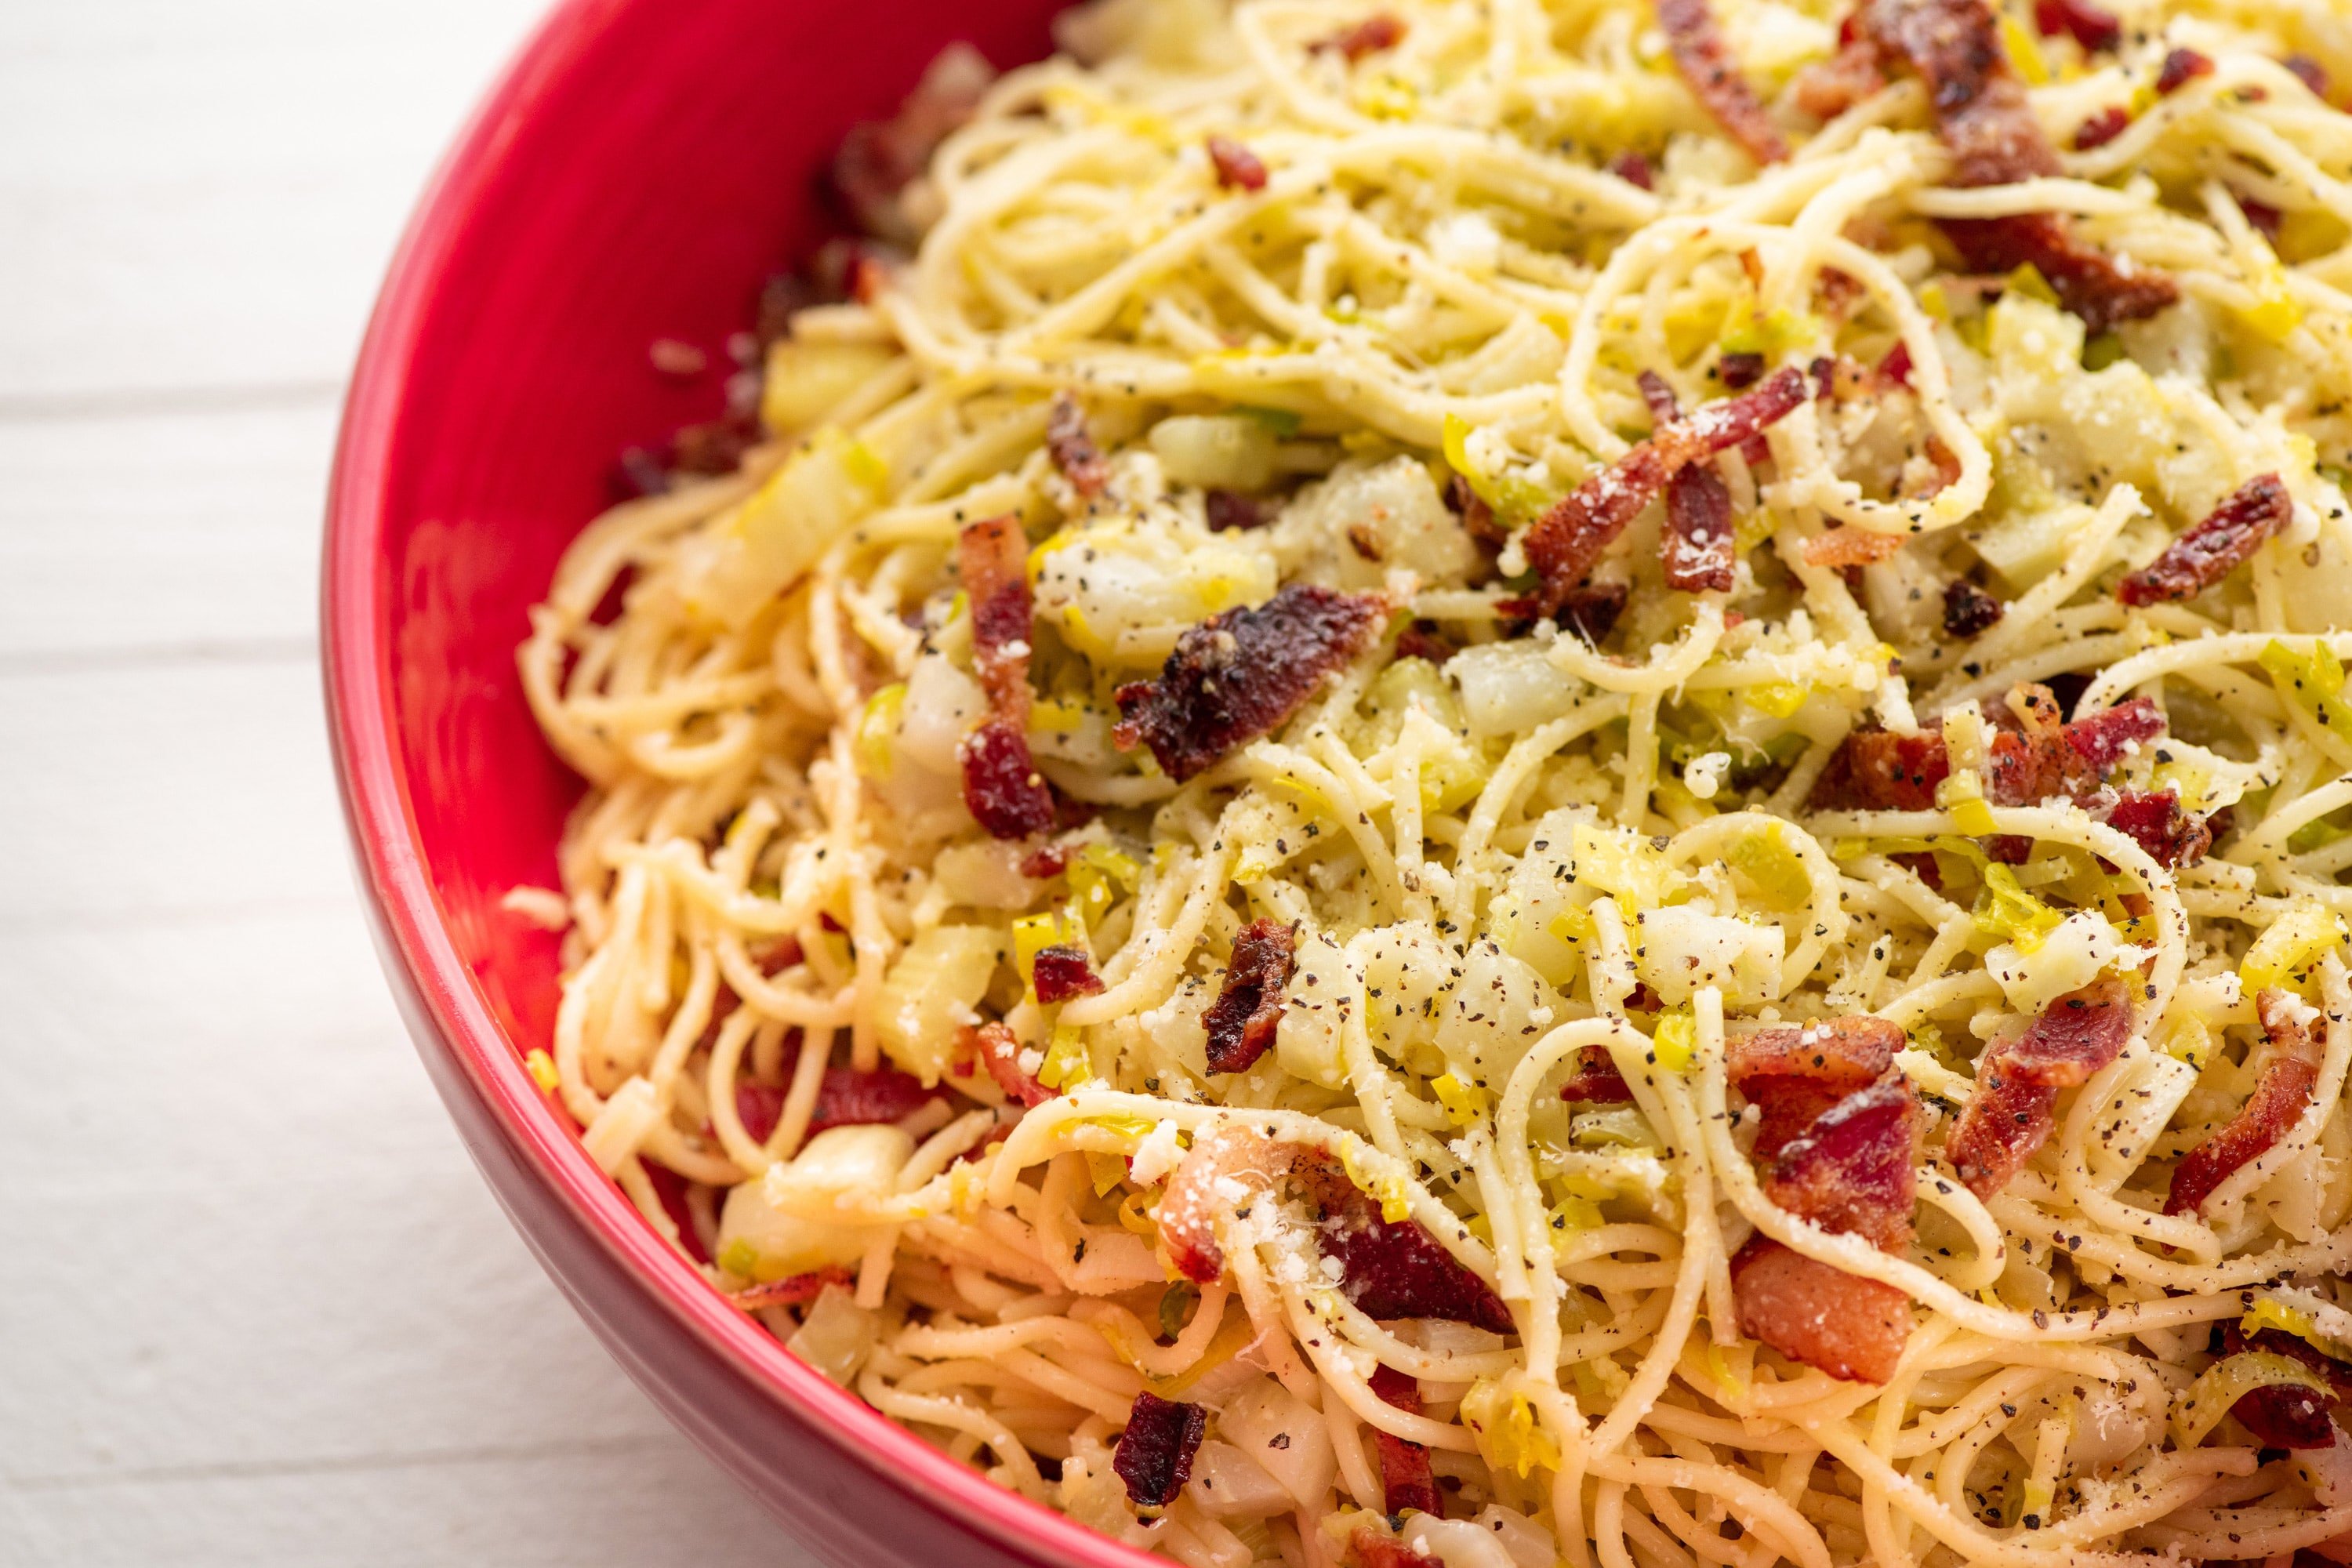 Red bowl with spaghetti, fennel, bacon, and Parmesan cheese.